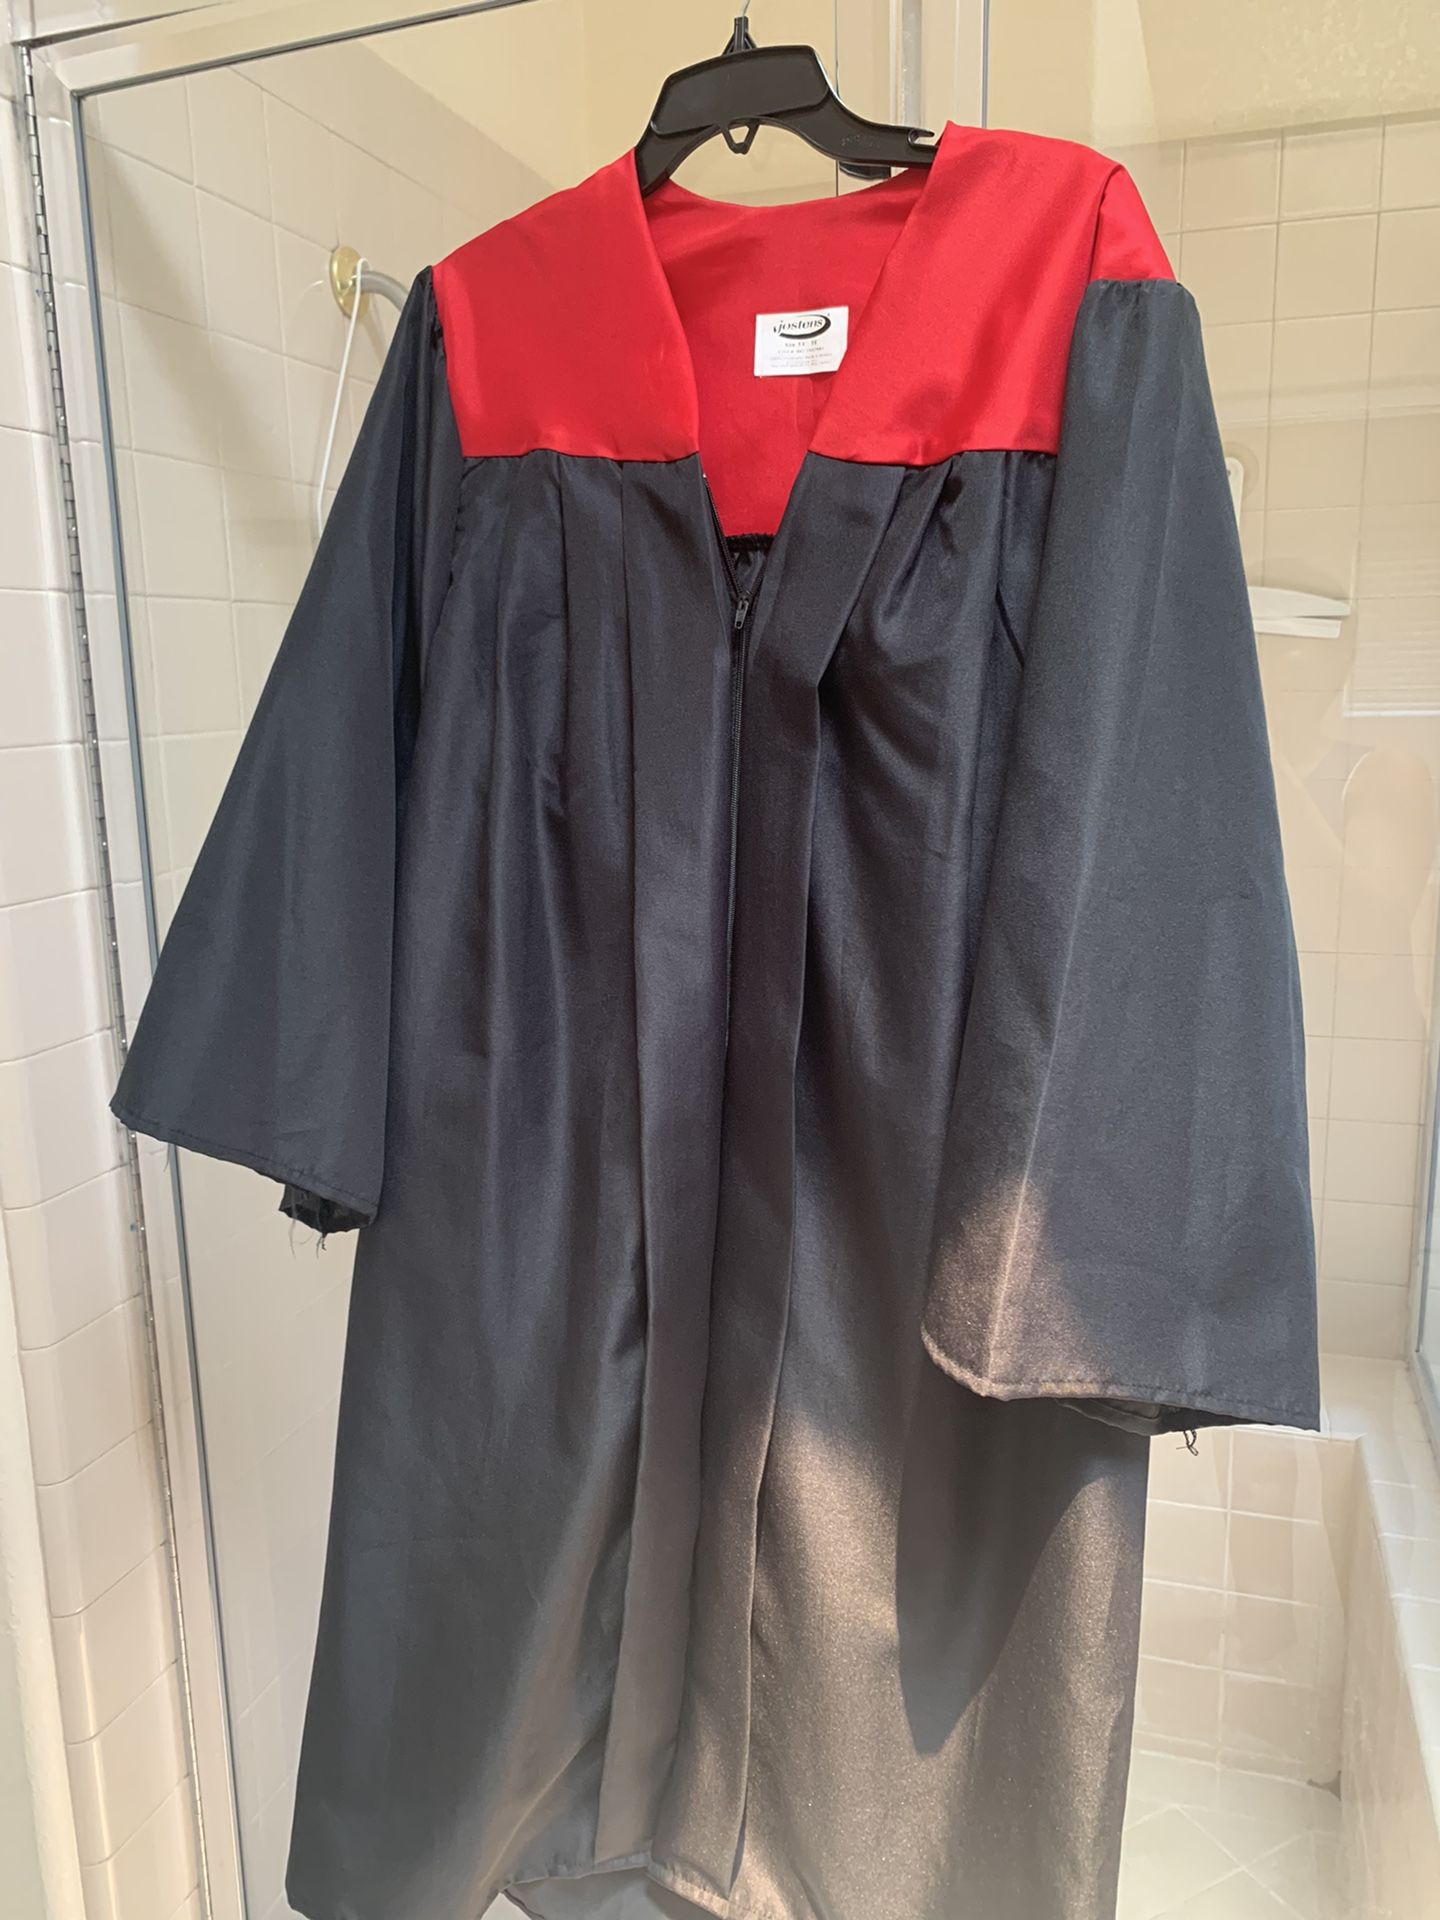 Graduation  CAP And Gown - Black And red